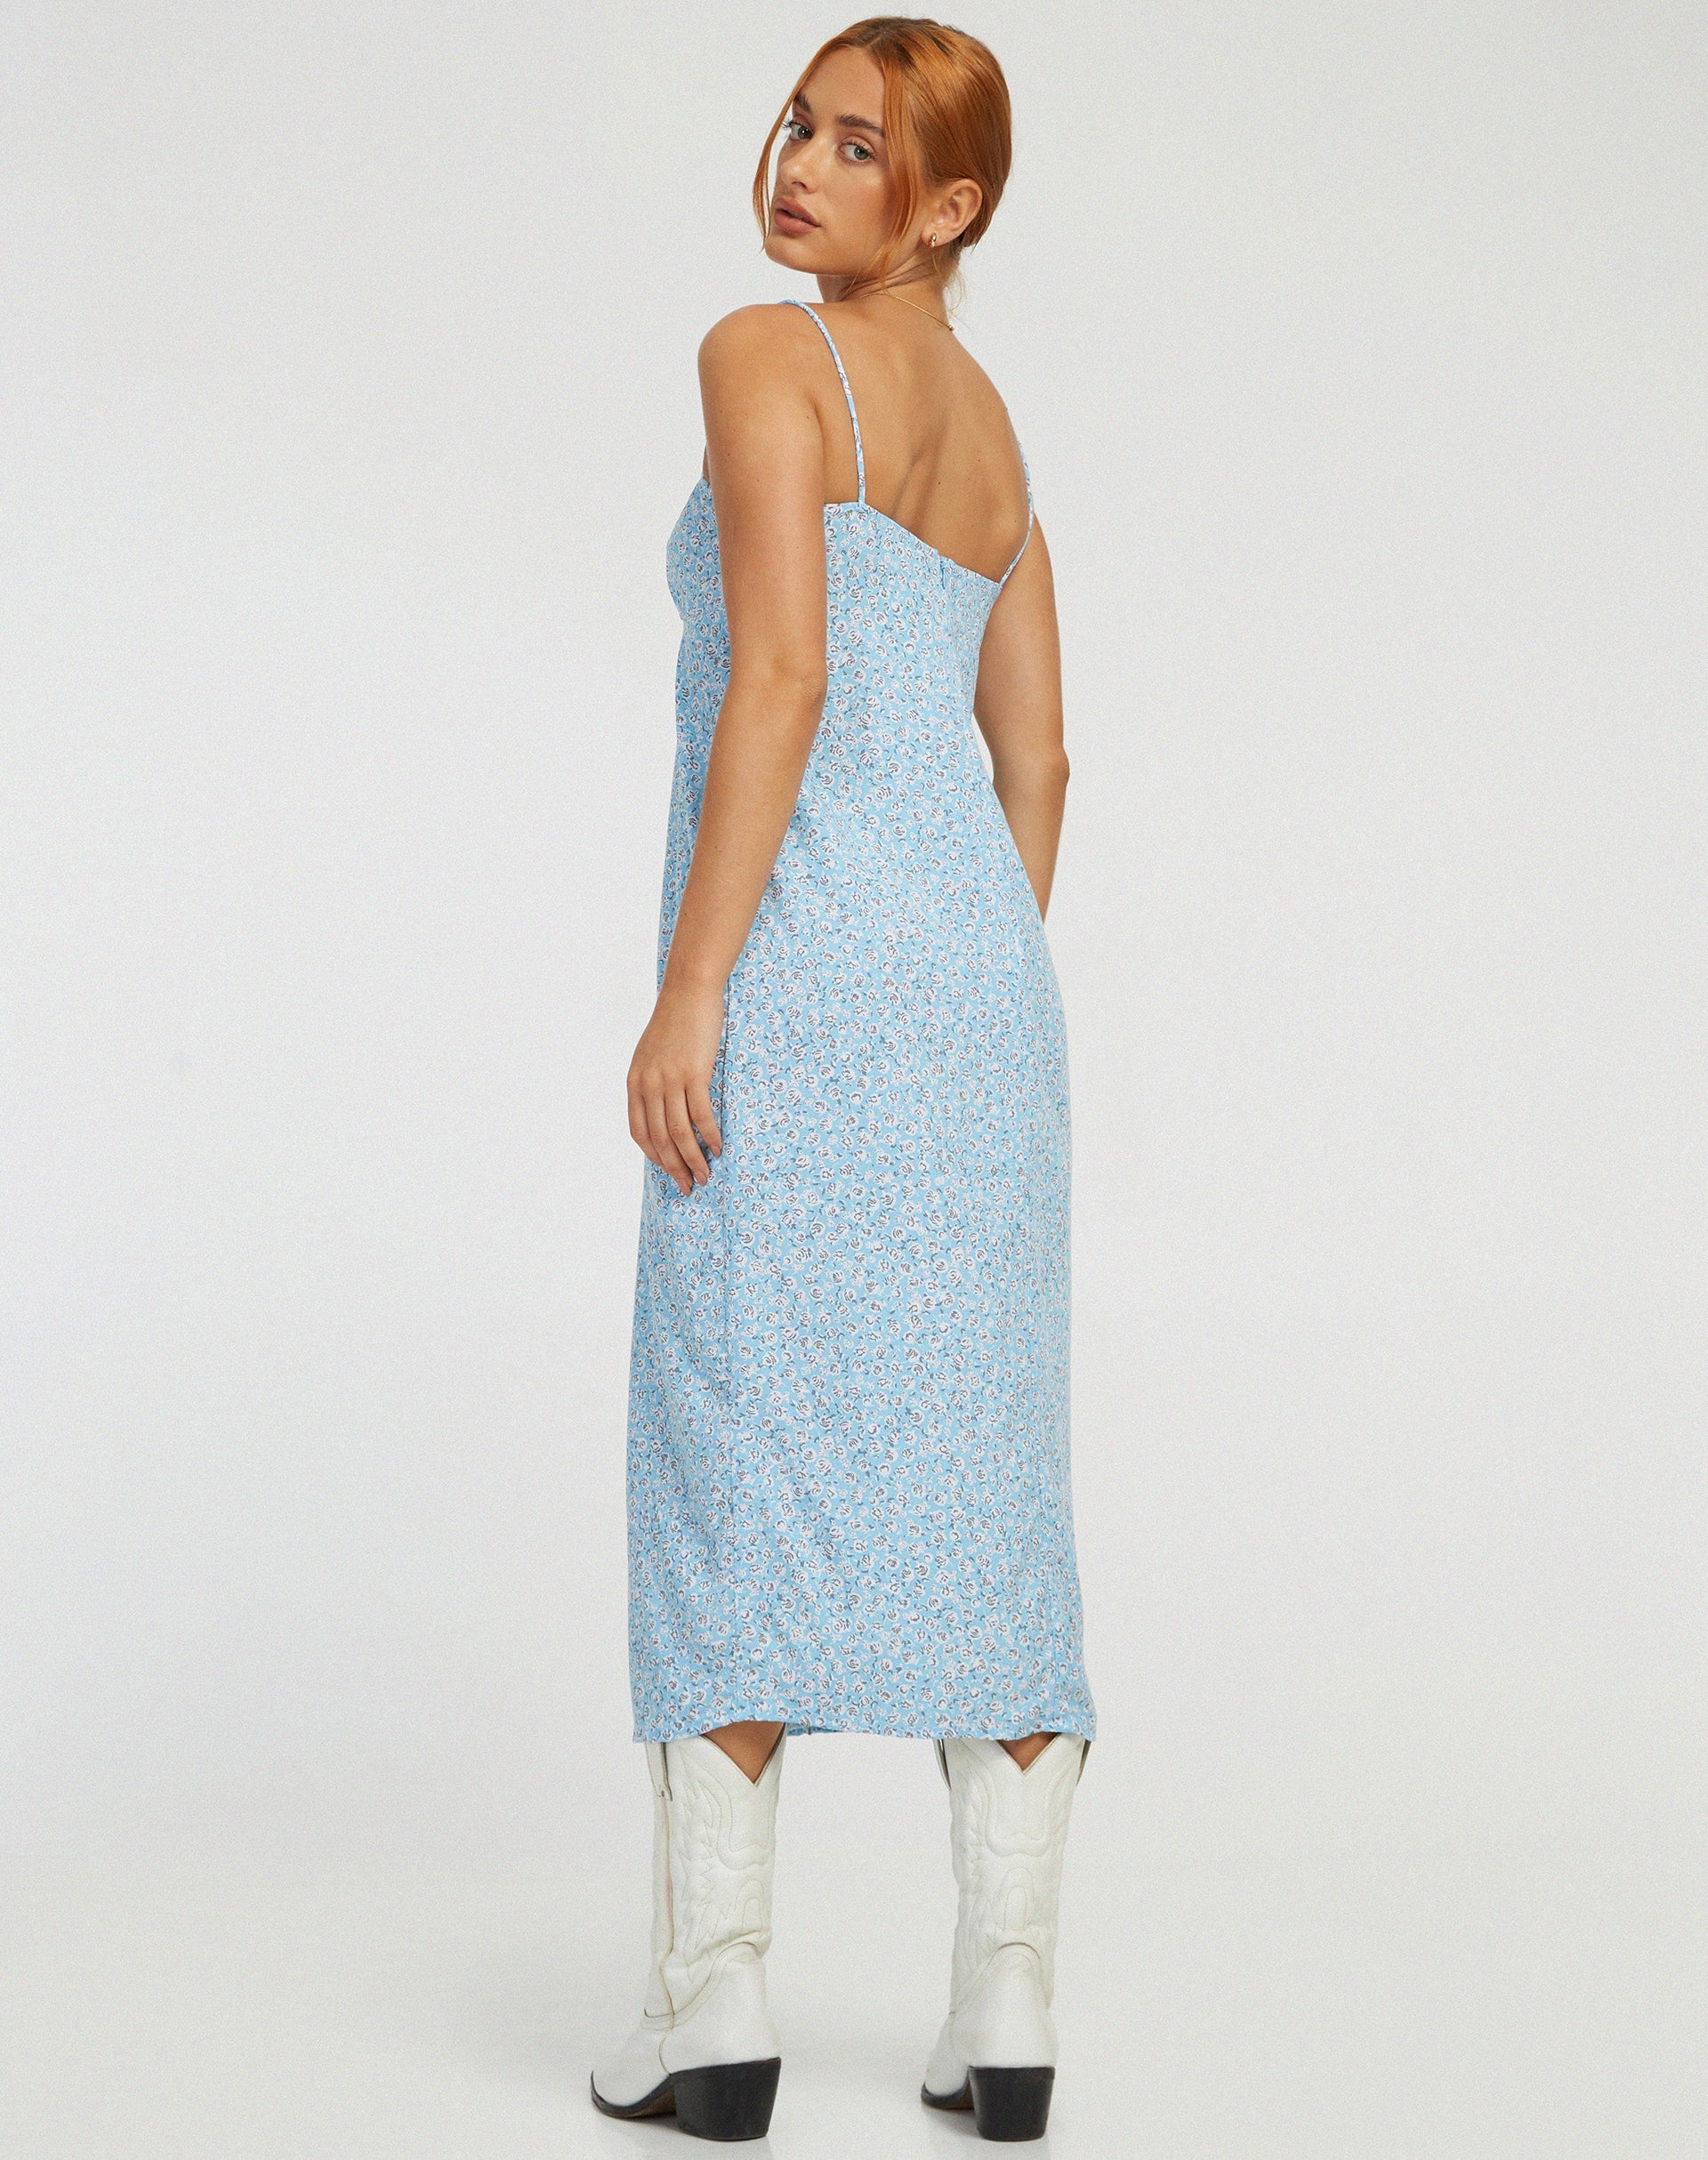 Image of Cypress Midi Dress in Ditsy Rose Blue